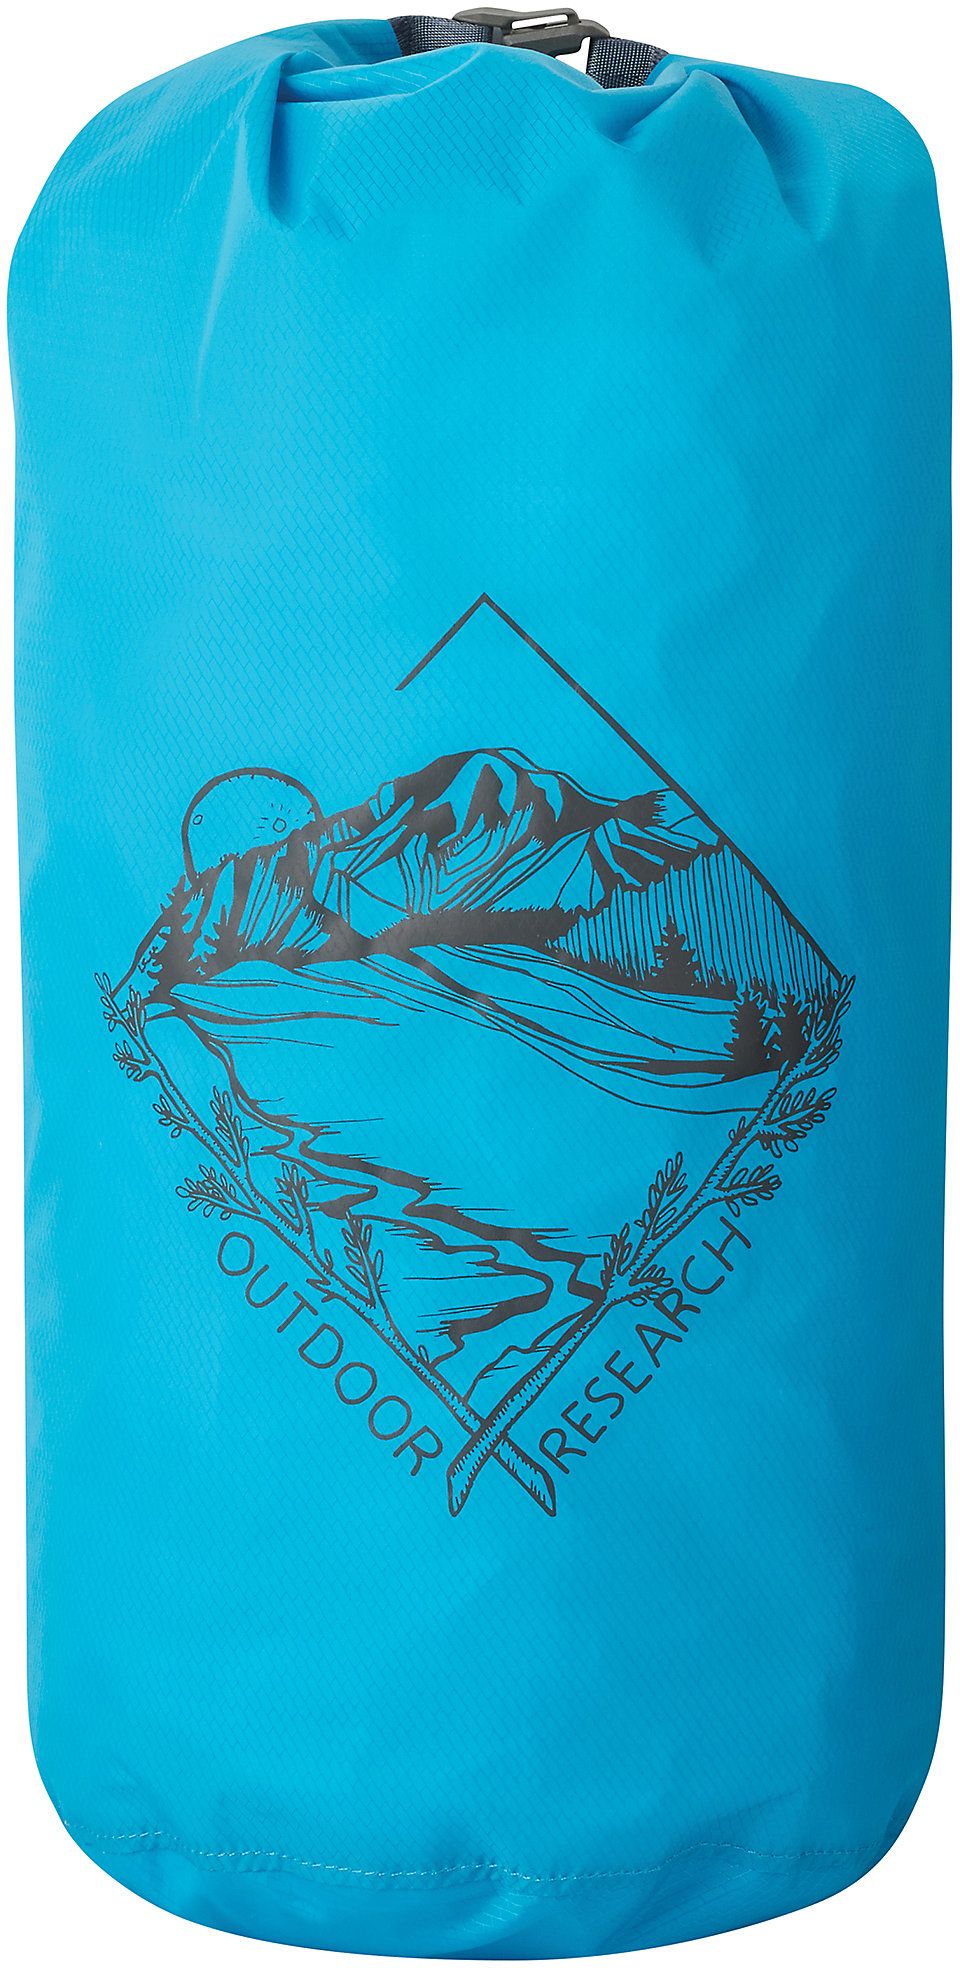 Photos - Outdoor Furniture Outdoor Research Packout Graphic 15L DryBag, Essentials Atoll 23OREUPCKTGR